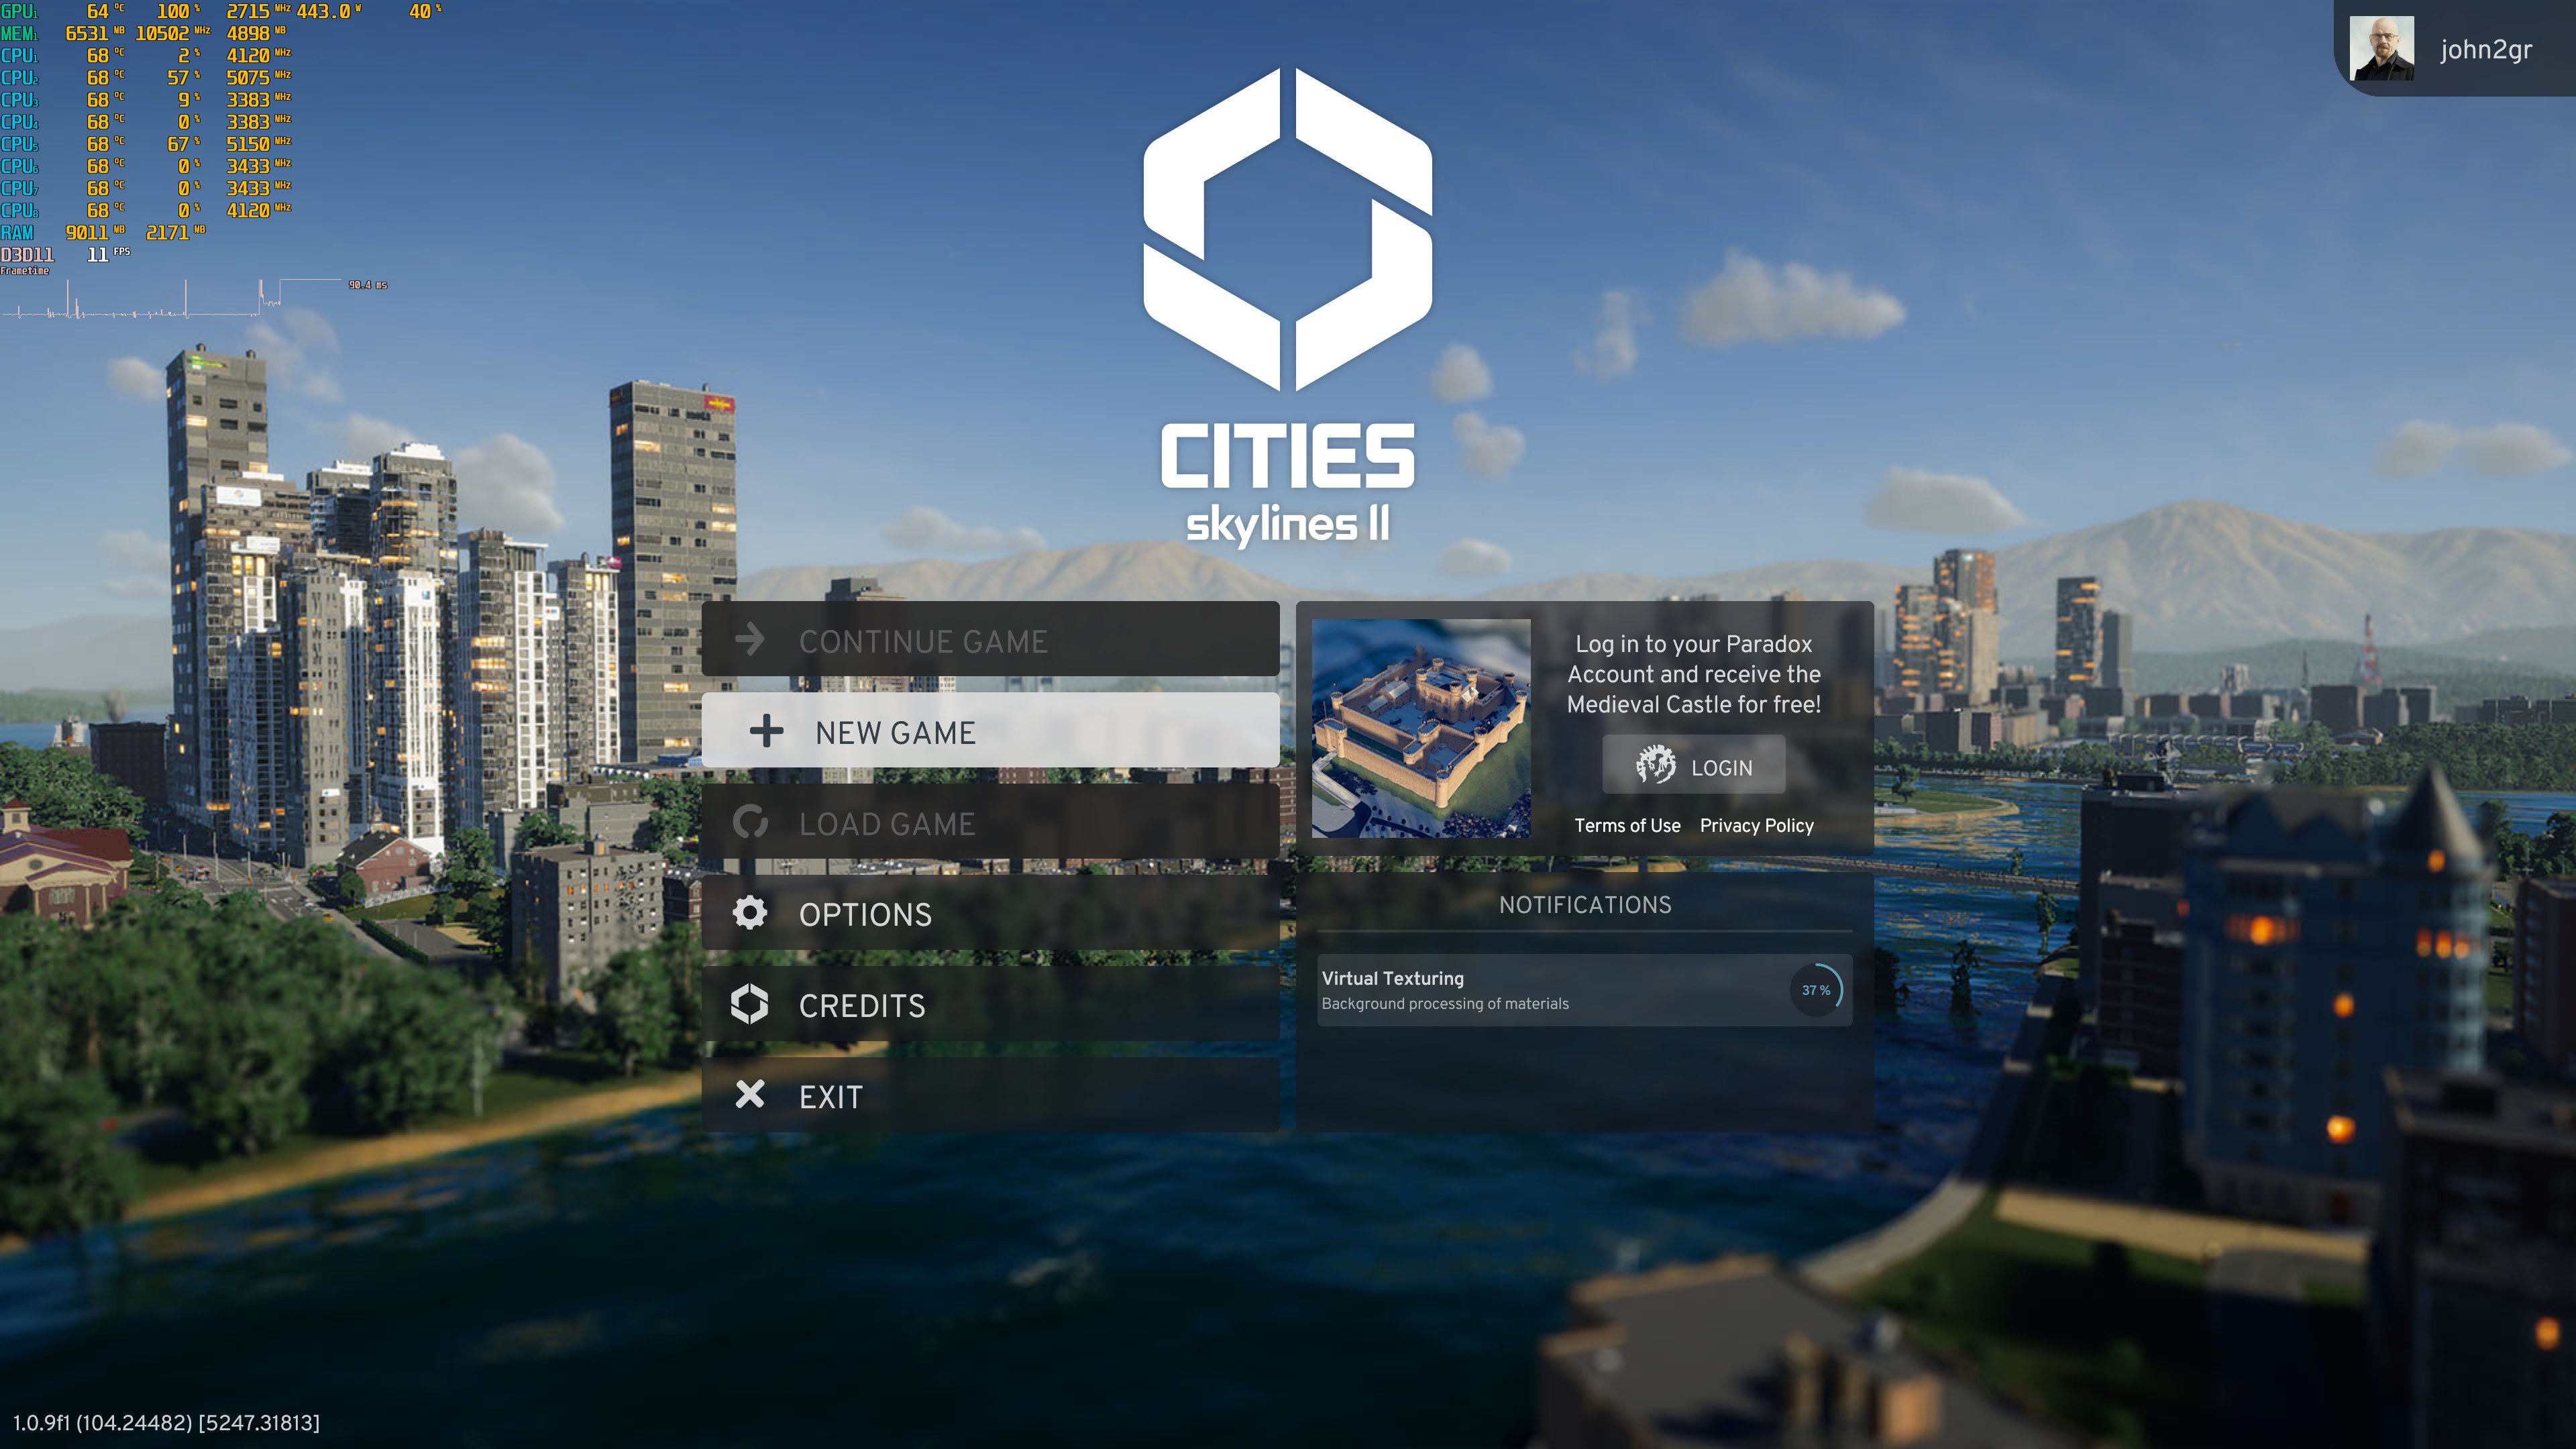 Cities Skylines II - system requirements